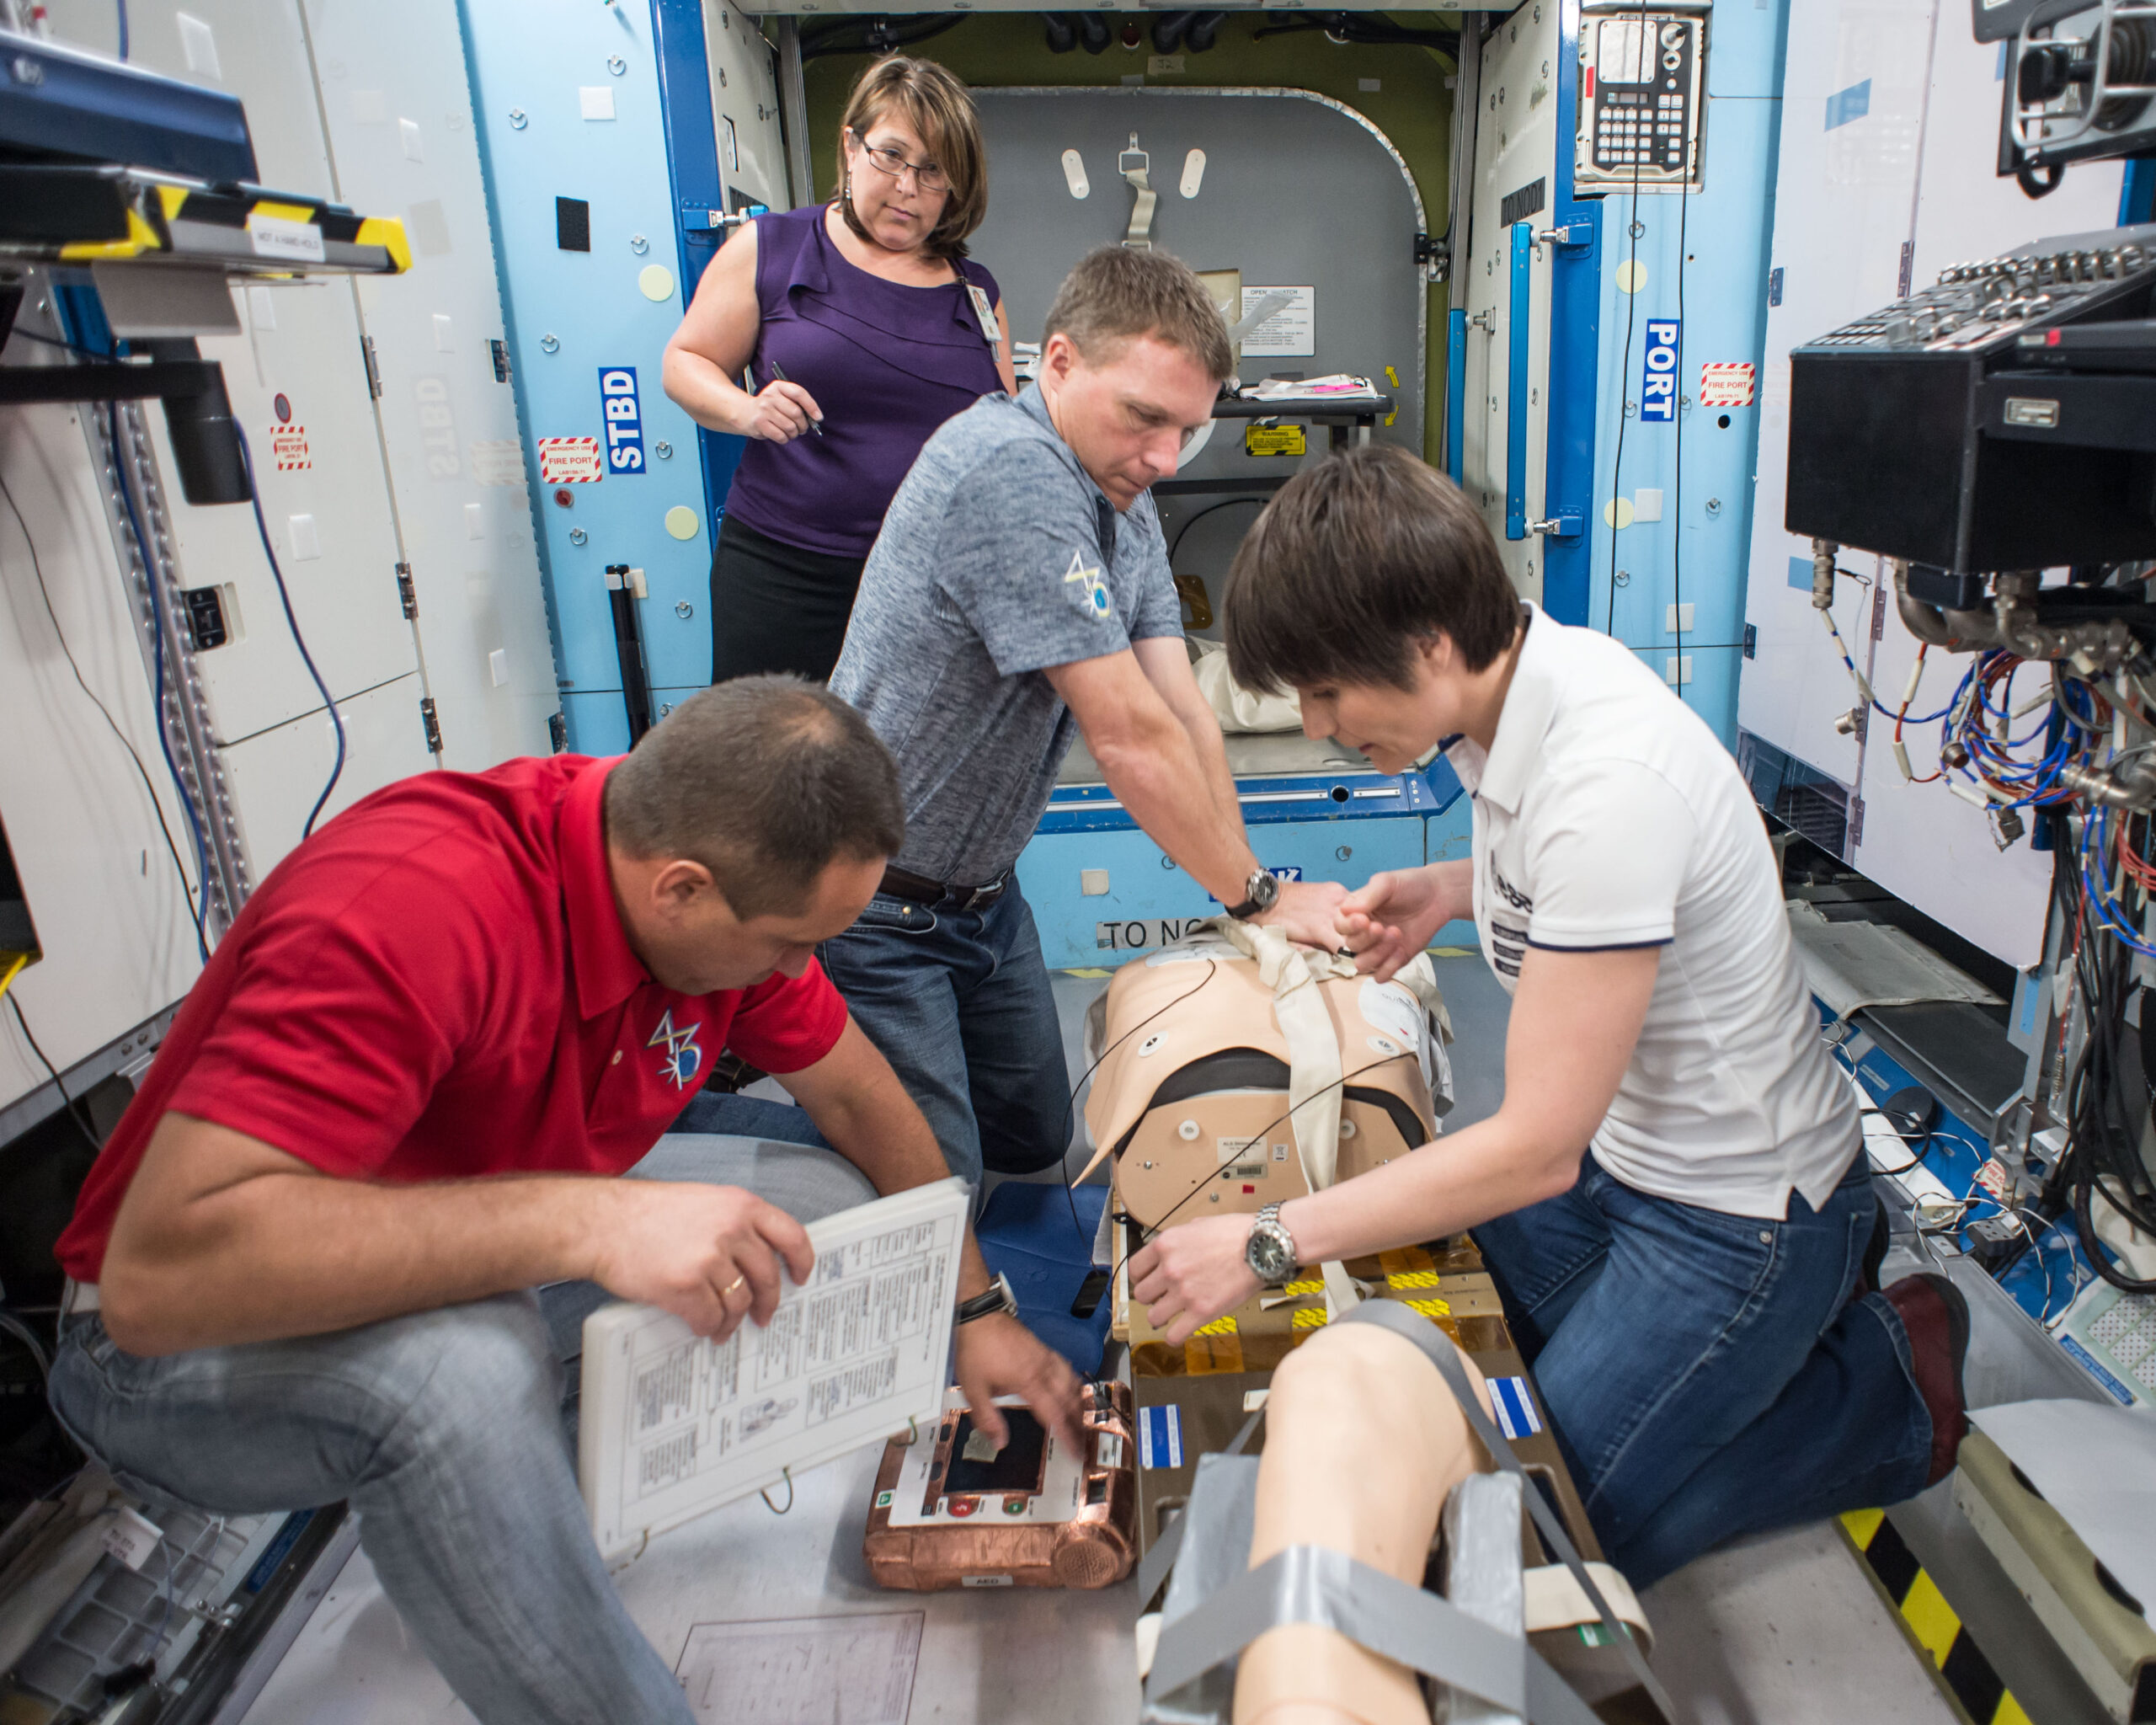 How Do You Handle A Medical Emergency On A Mission To Mars?